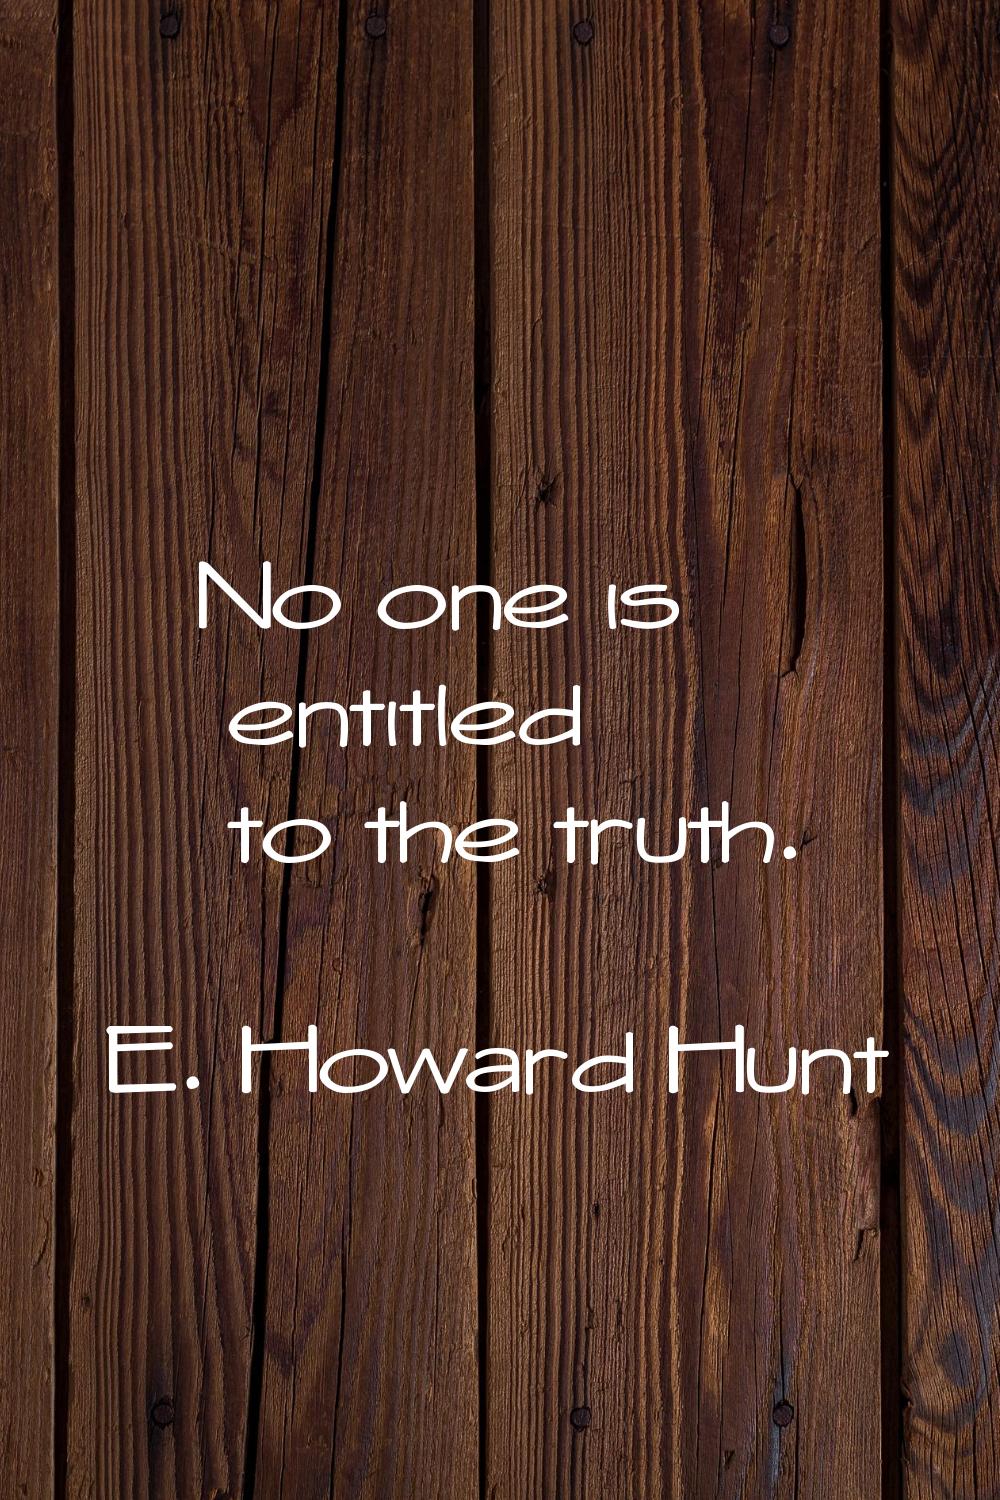 No one is entitled to the truth.